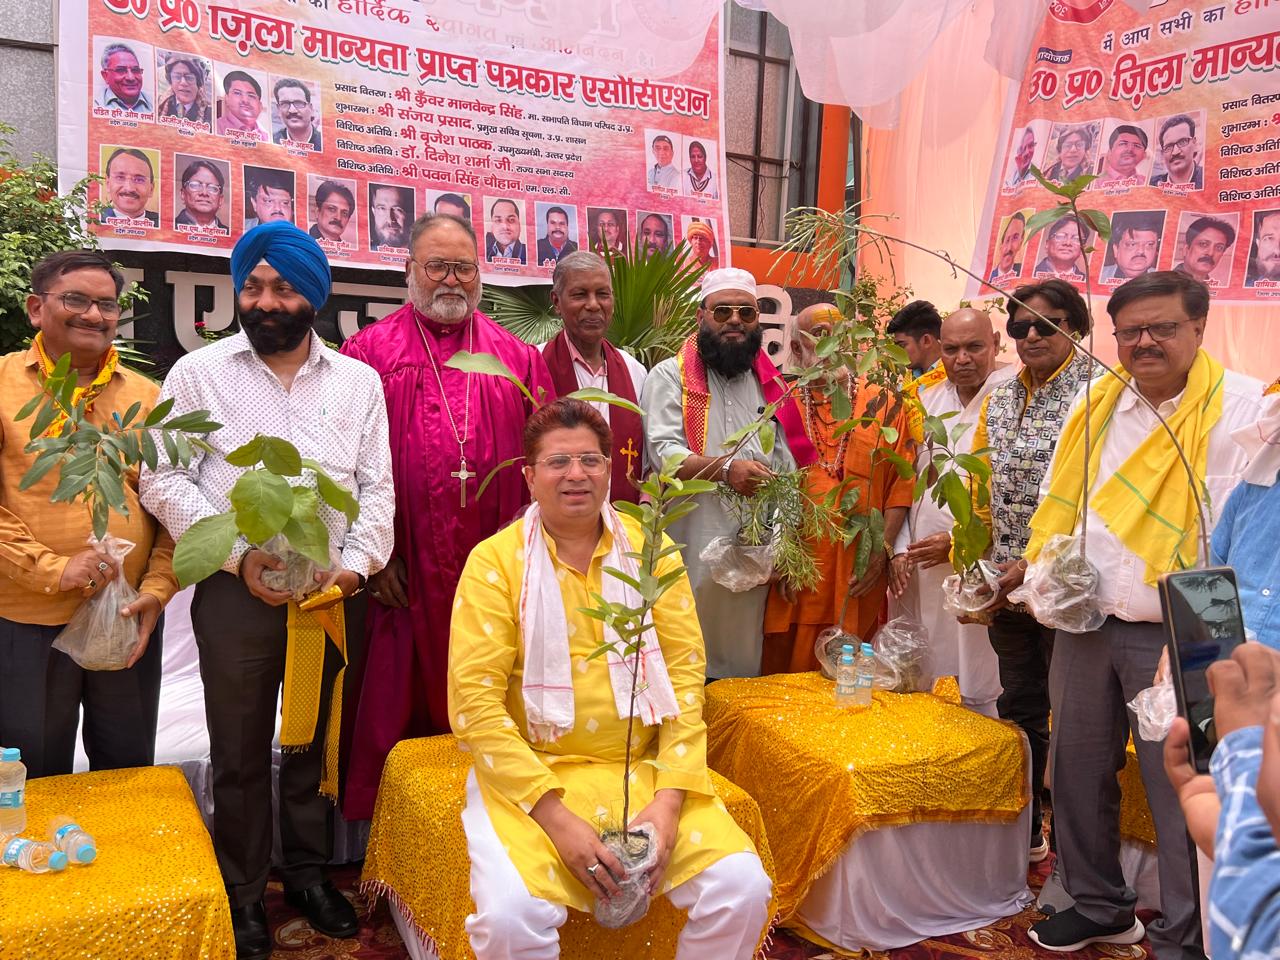 The Bhandaara of the Journalist Association concluded with the message of social harmony and tree plantation